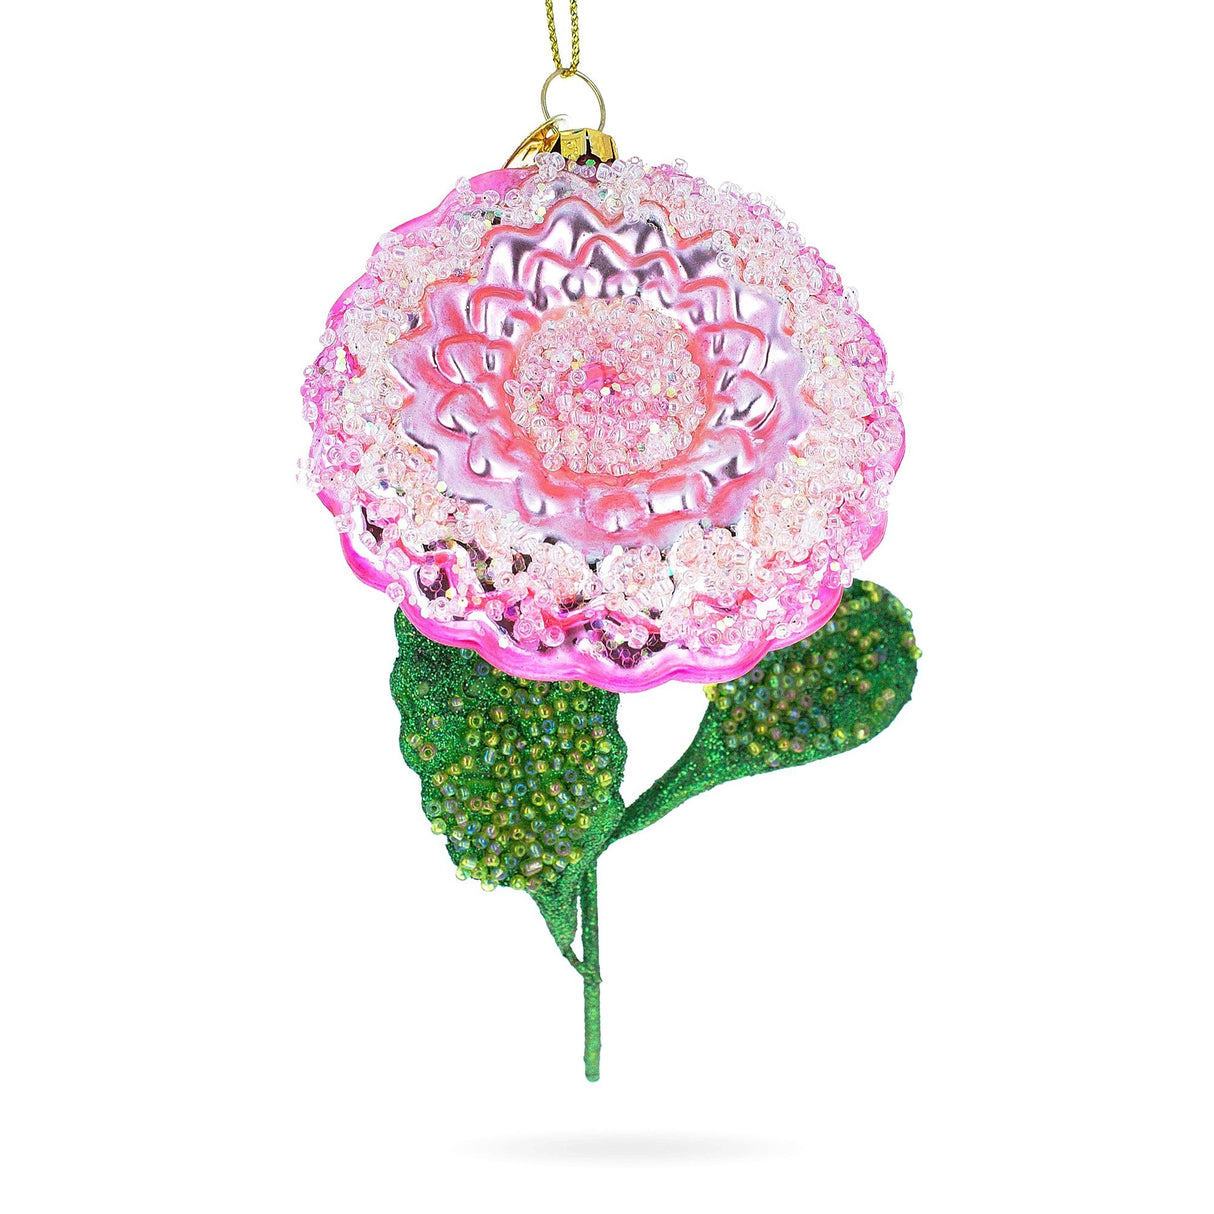 Glass Delicate Pink Flower with Colorful Beads - Blown Glass Christmas Ornament in Pink color